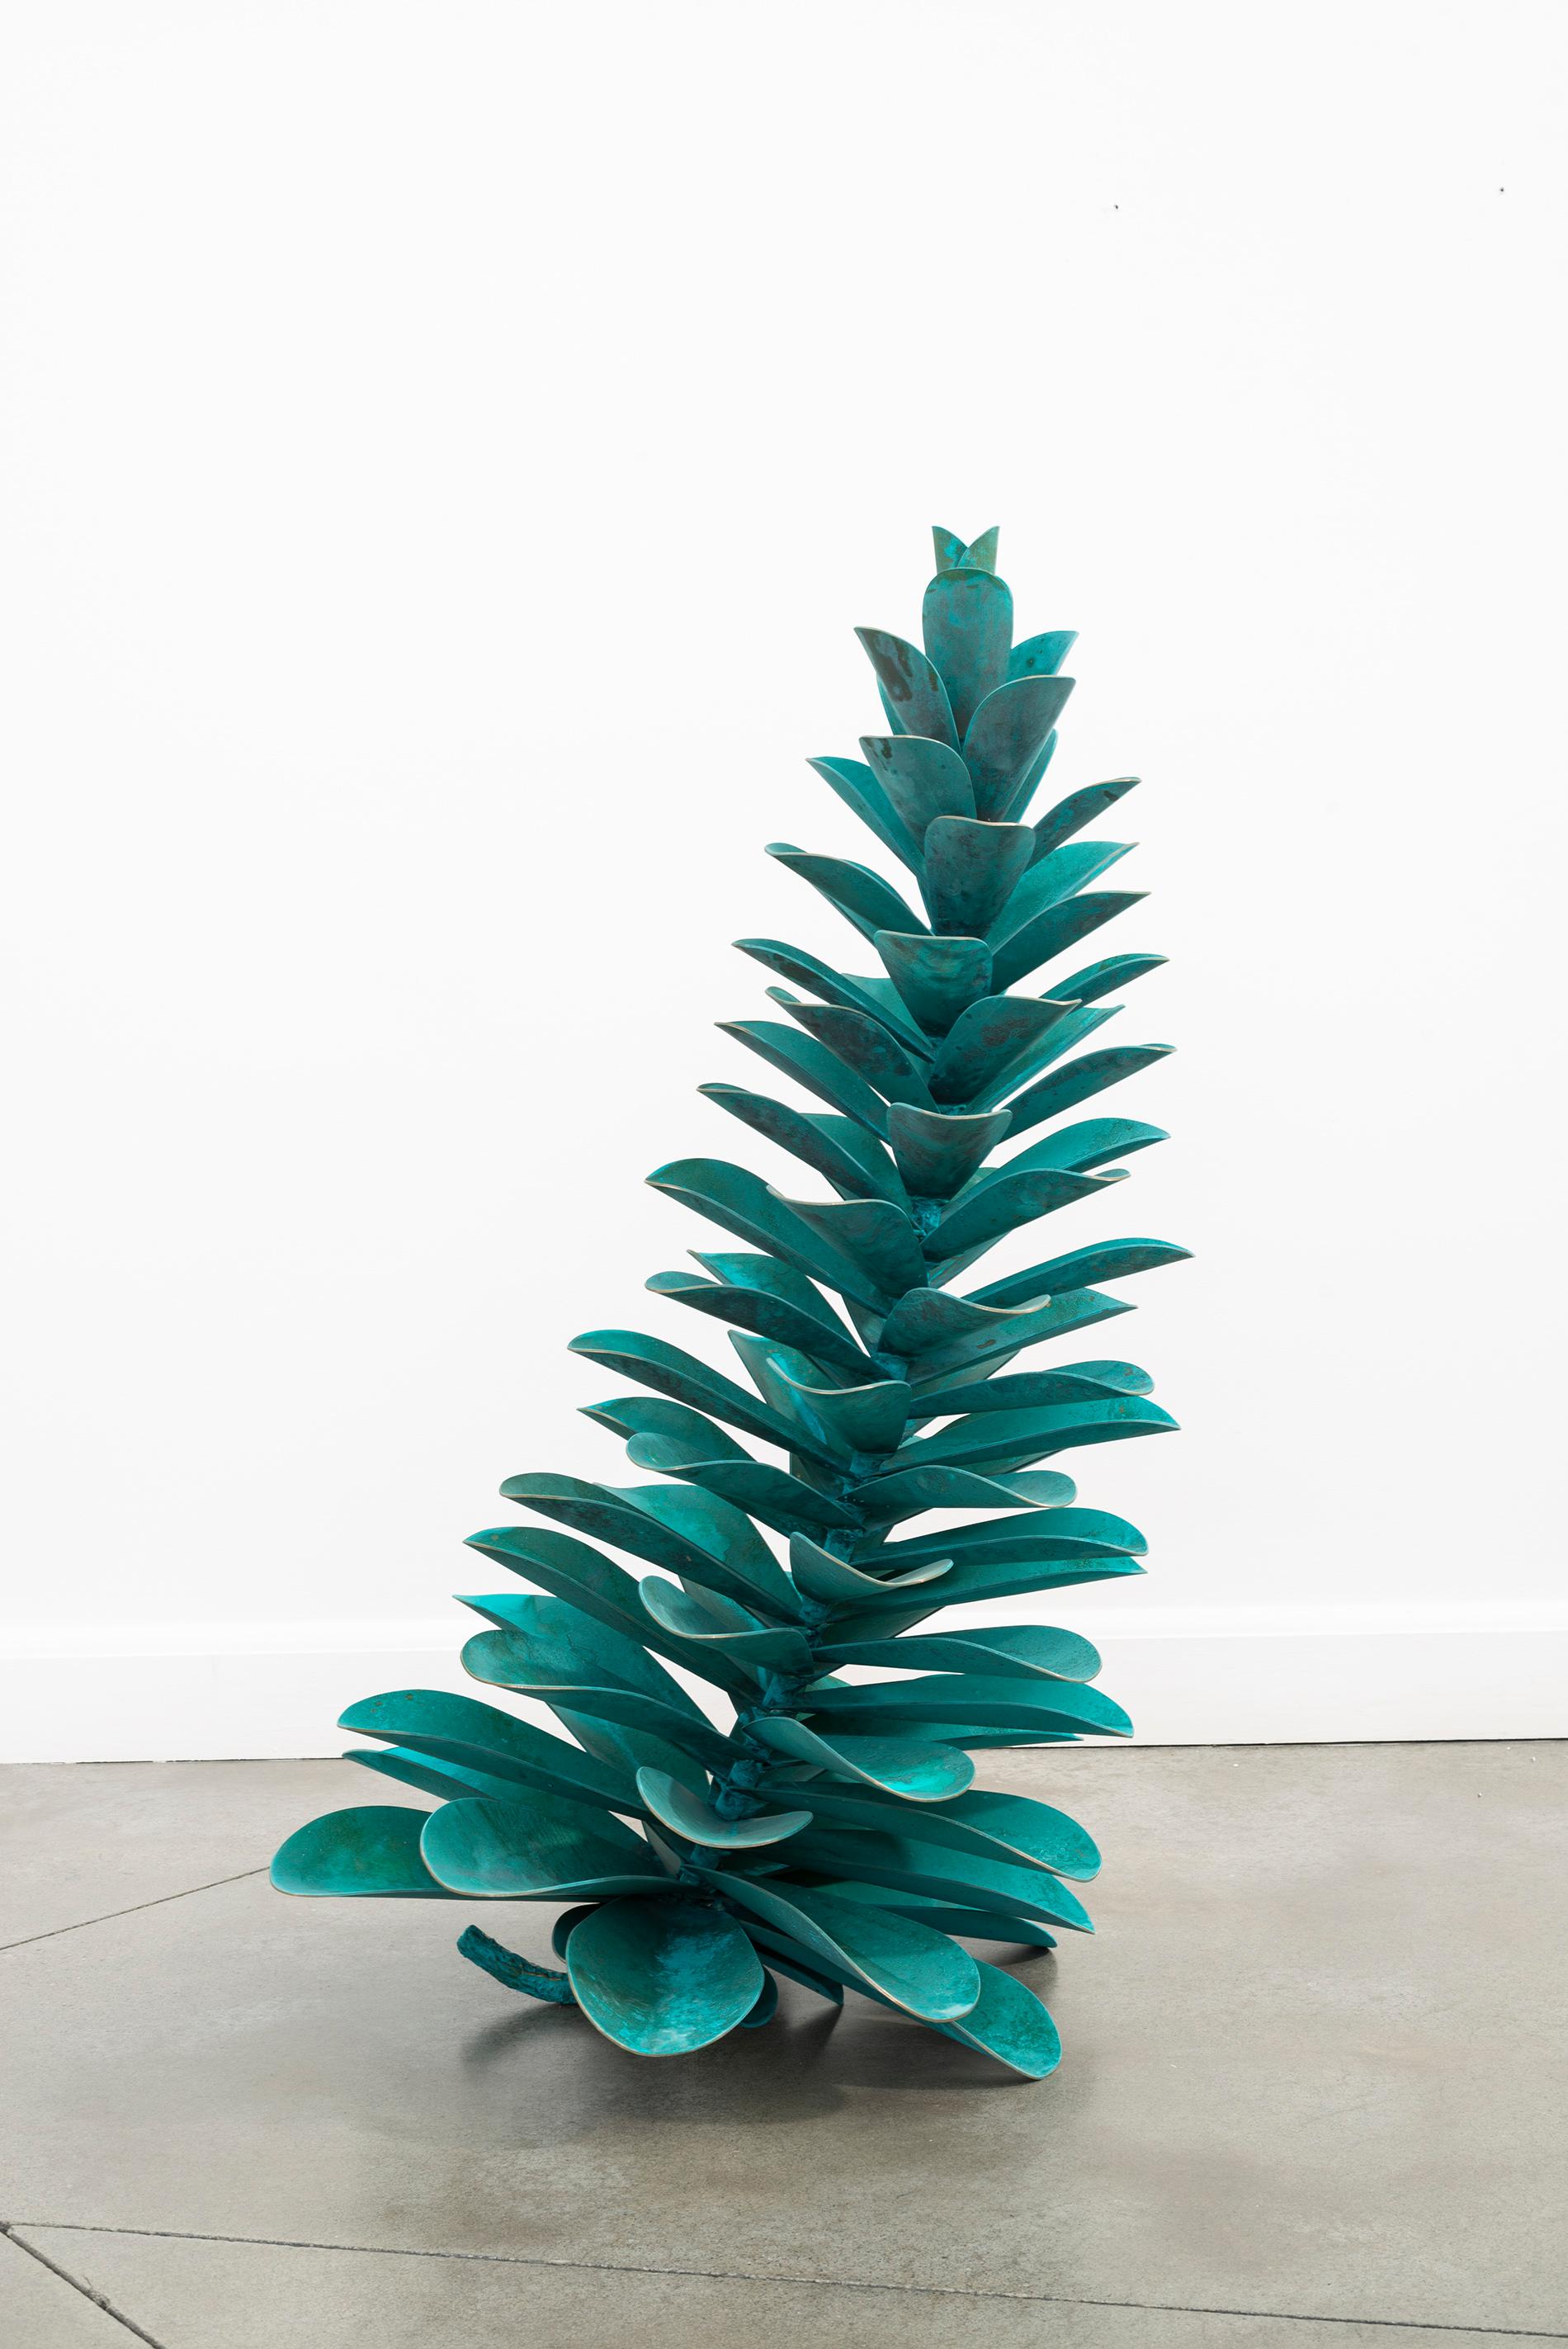 Wow! This large bronze sculpture by Floyd Elzinga is simply a ‘knock-out’ with its bright turquoise patina. The Canadian sculptor is known for using iconic imagery in his pop artwork. The series of pine cones he’s created emulates the details of the